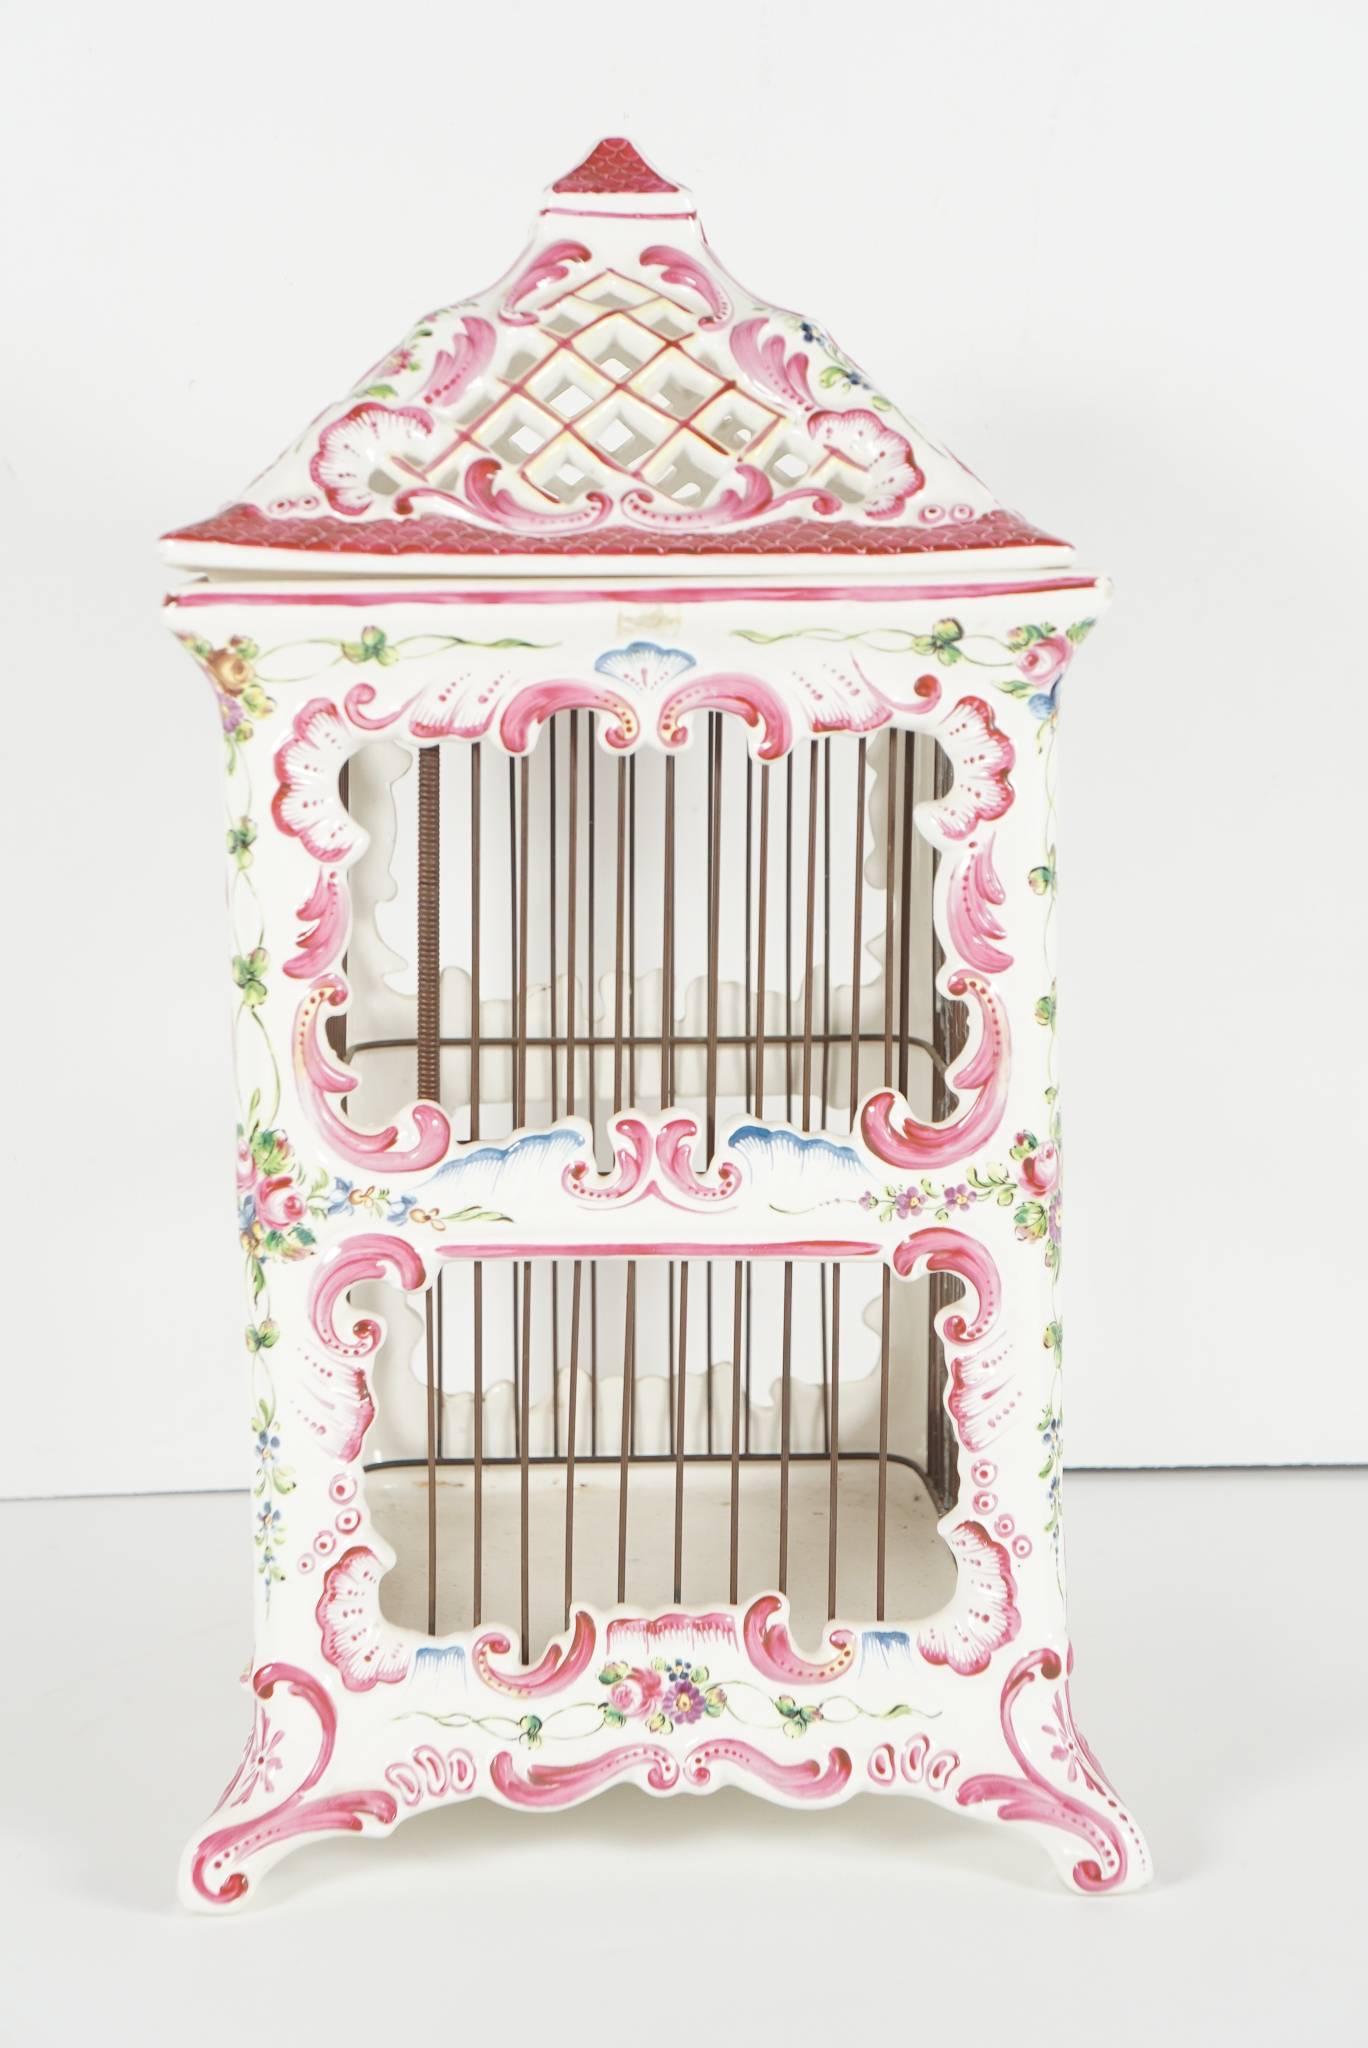 Rococo Vintage French Faience Bird Cage from the Estate of Paul & Bunny Mellon